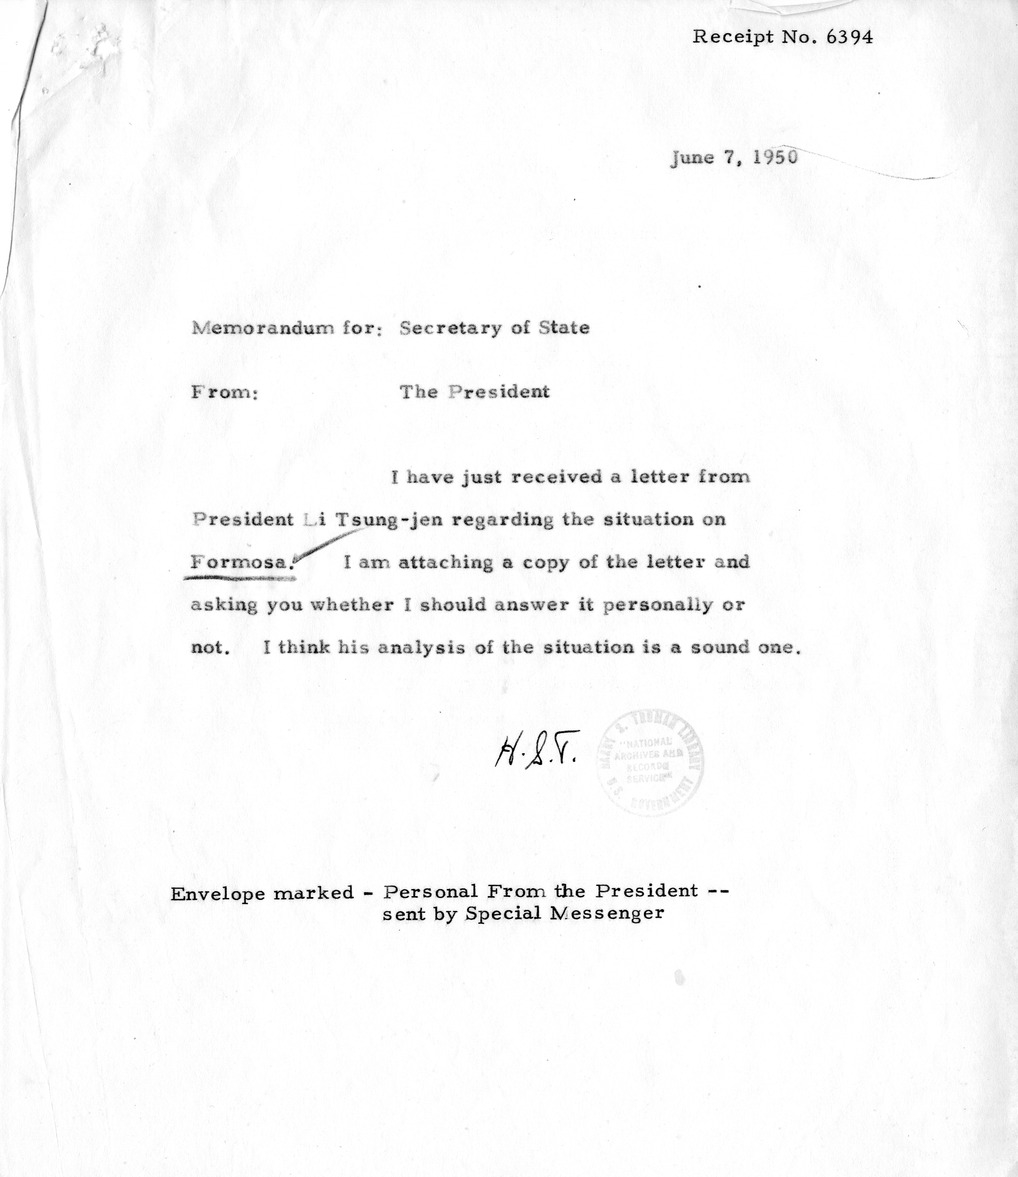 Memorandum from President Harry S. Truman to Secretary of State Dean Acheson with Attached Letter from Li Tsung-jen to President Truman